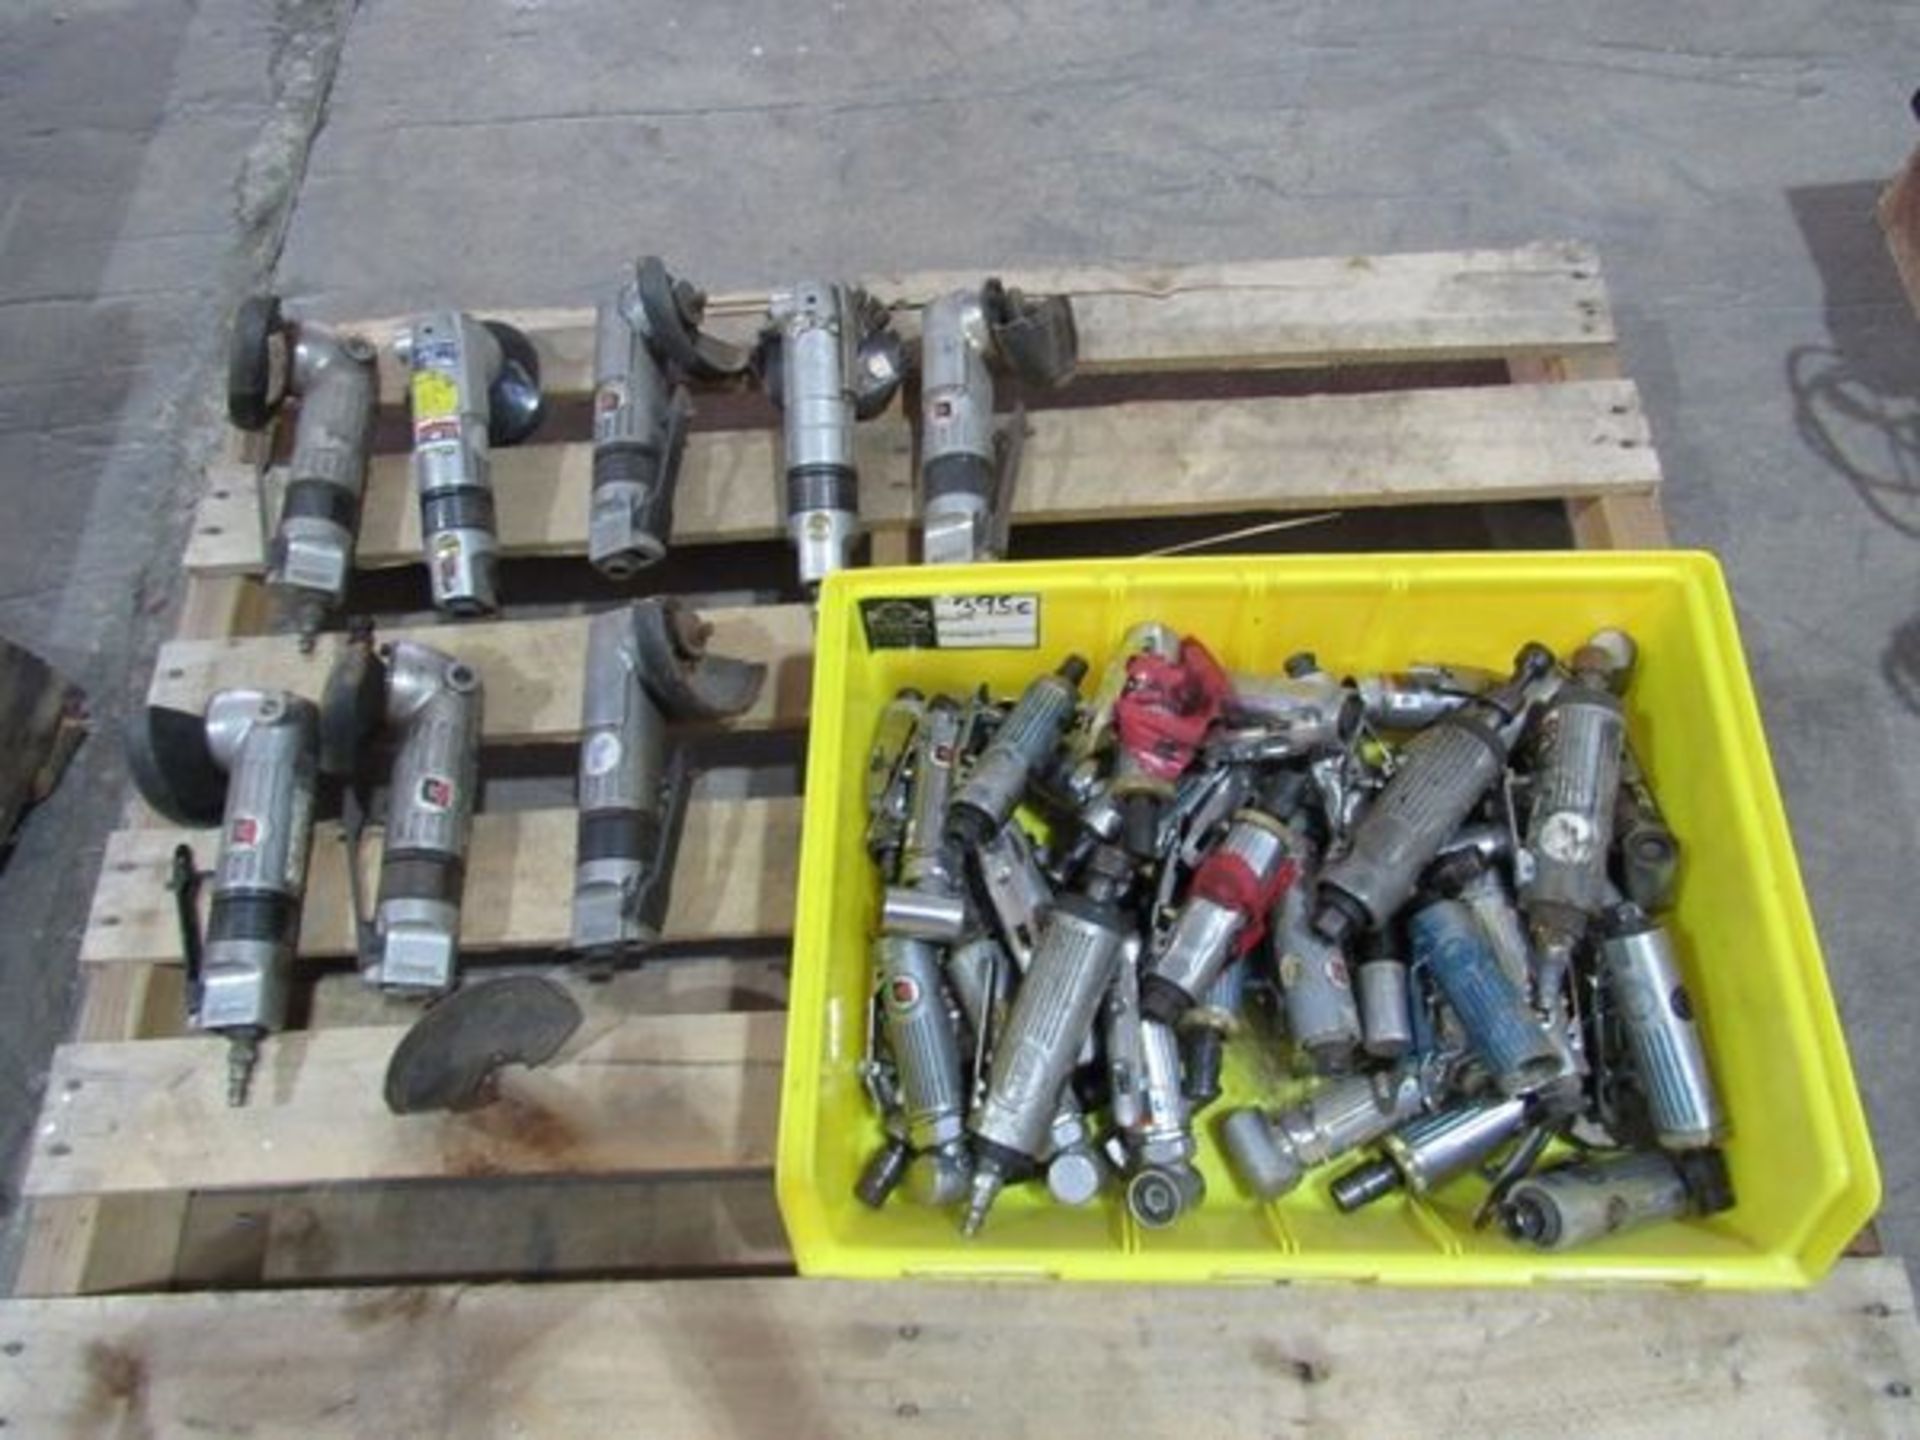 (Approx qty - 35) Pneumatic Grinders-